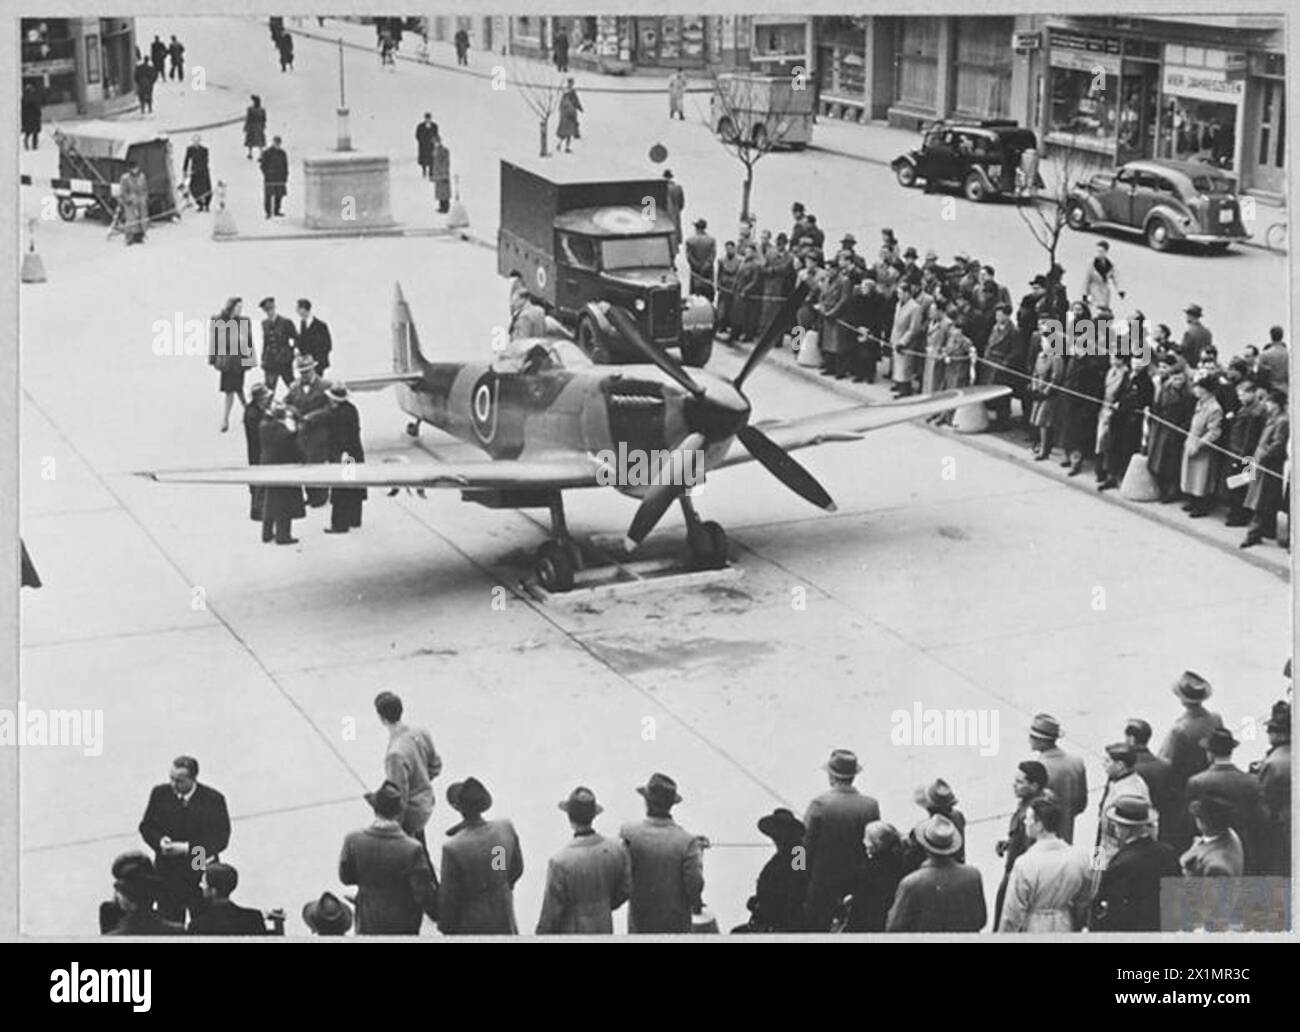 R.A.F. EXHIBITION AT ZURICH, SWITZERLAND - A Spitfire aircraft with an outstanding operational record was 'On Parade' at the Royal Air Force Exhibition which was held at the large departmental store of 'Jelmoli' in the main street of Zurich, Switzerland. Swiss Army and Air Force officers, as well as the public attended the opening ceremony, which was performed by Air Marshal Sir Arthur Coningham, KCB.,DSO.,MC.,DFC. Chief of Flying Training Command. February 1946. The operational 'Spitfire' outside the Exhibition, Royal Air Force Stock Photo